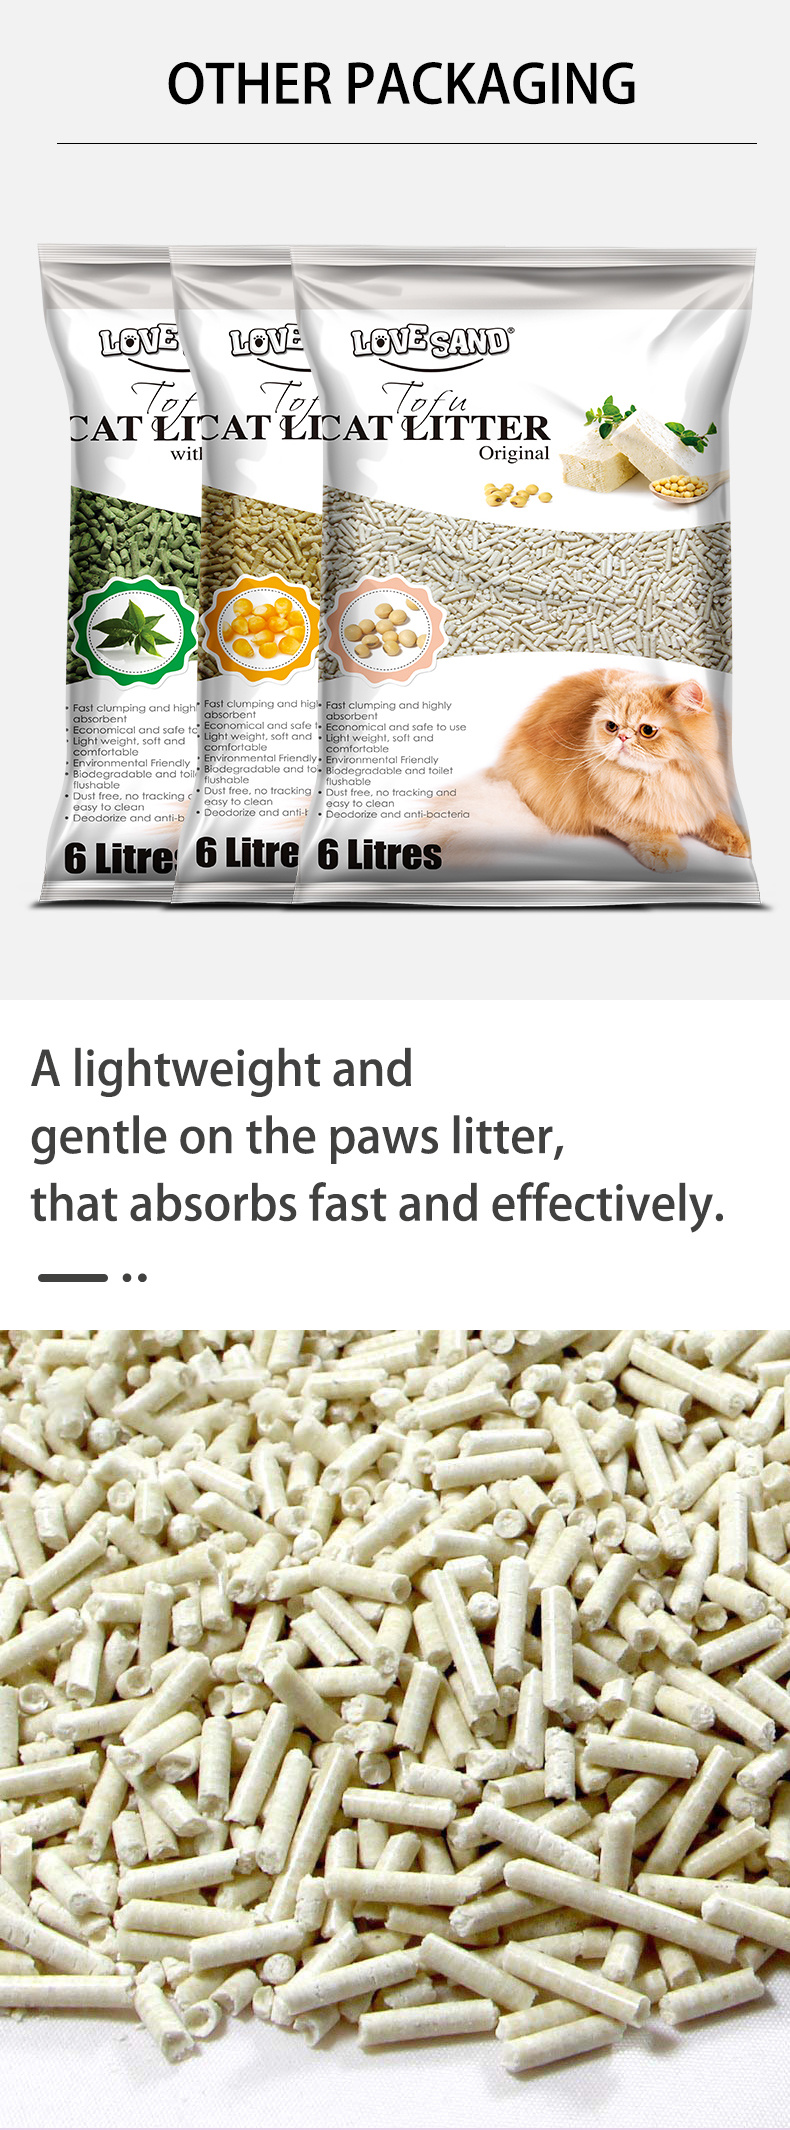 Hot Selling Wholesale Cat Litter for Pet Supply Store